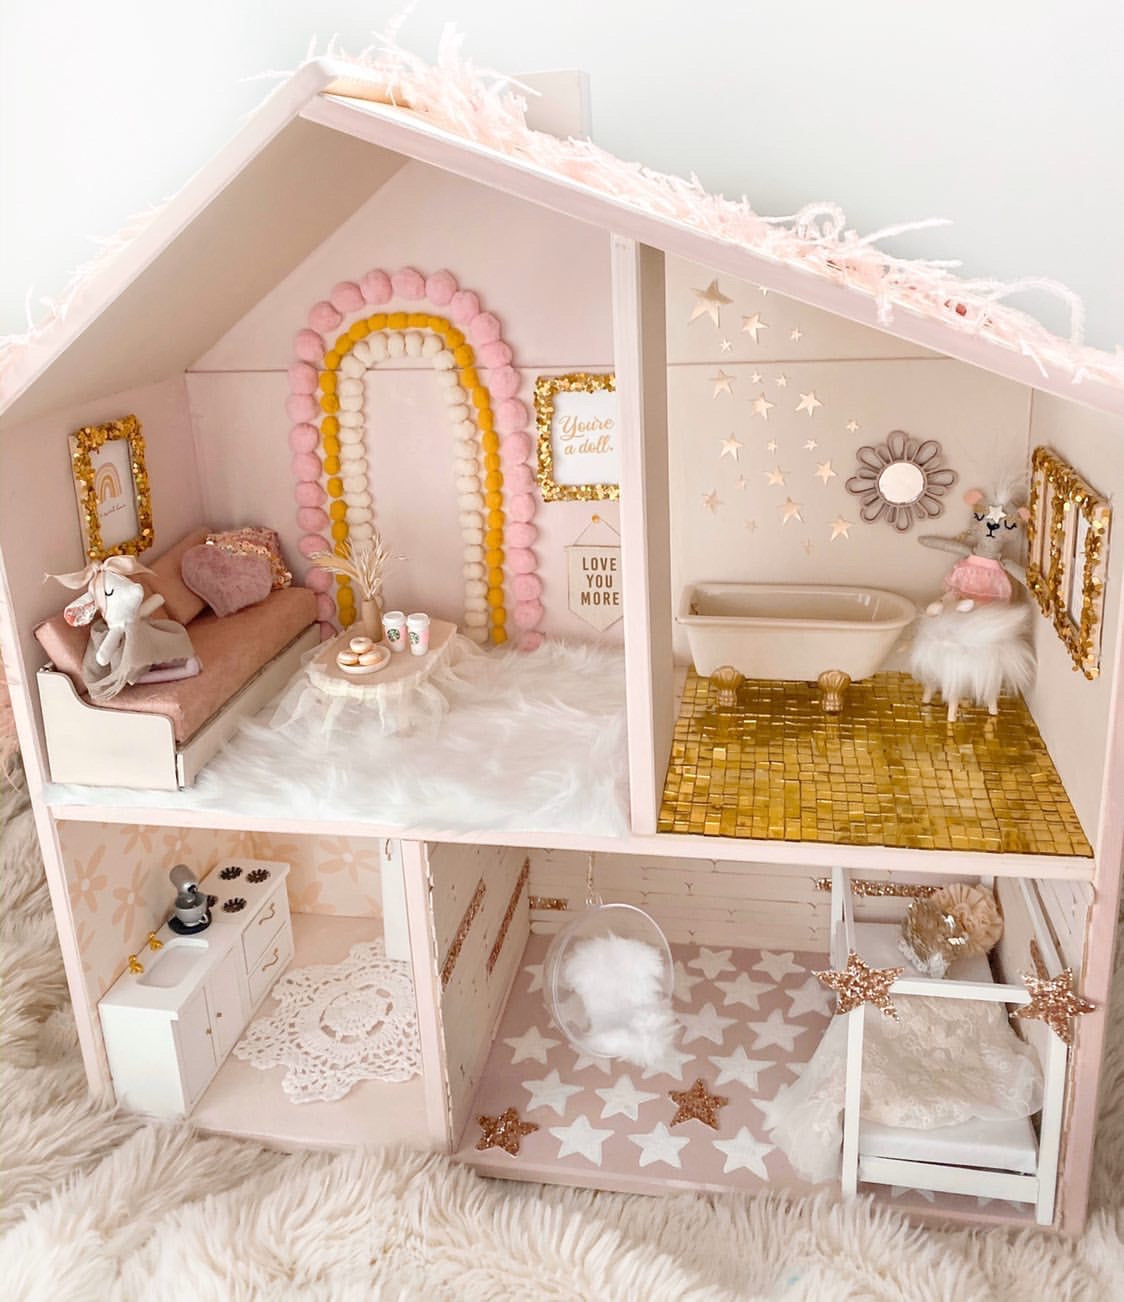 How to Create Beautiful Wallpaper for a Dollhouse 2 Ways